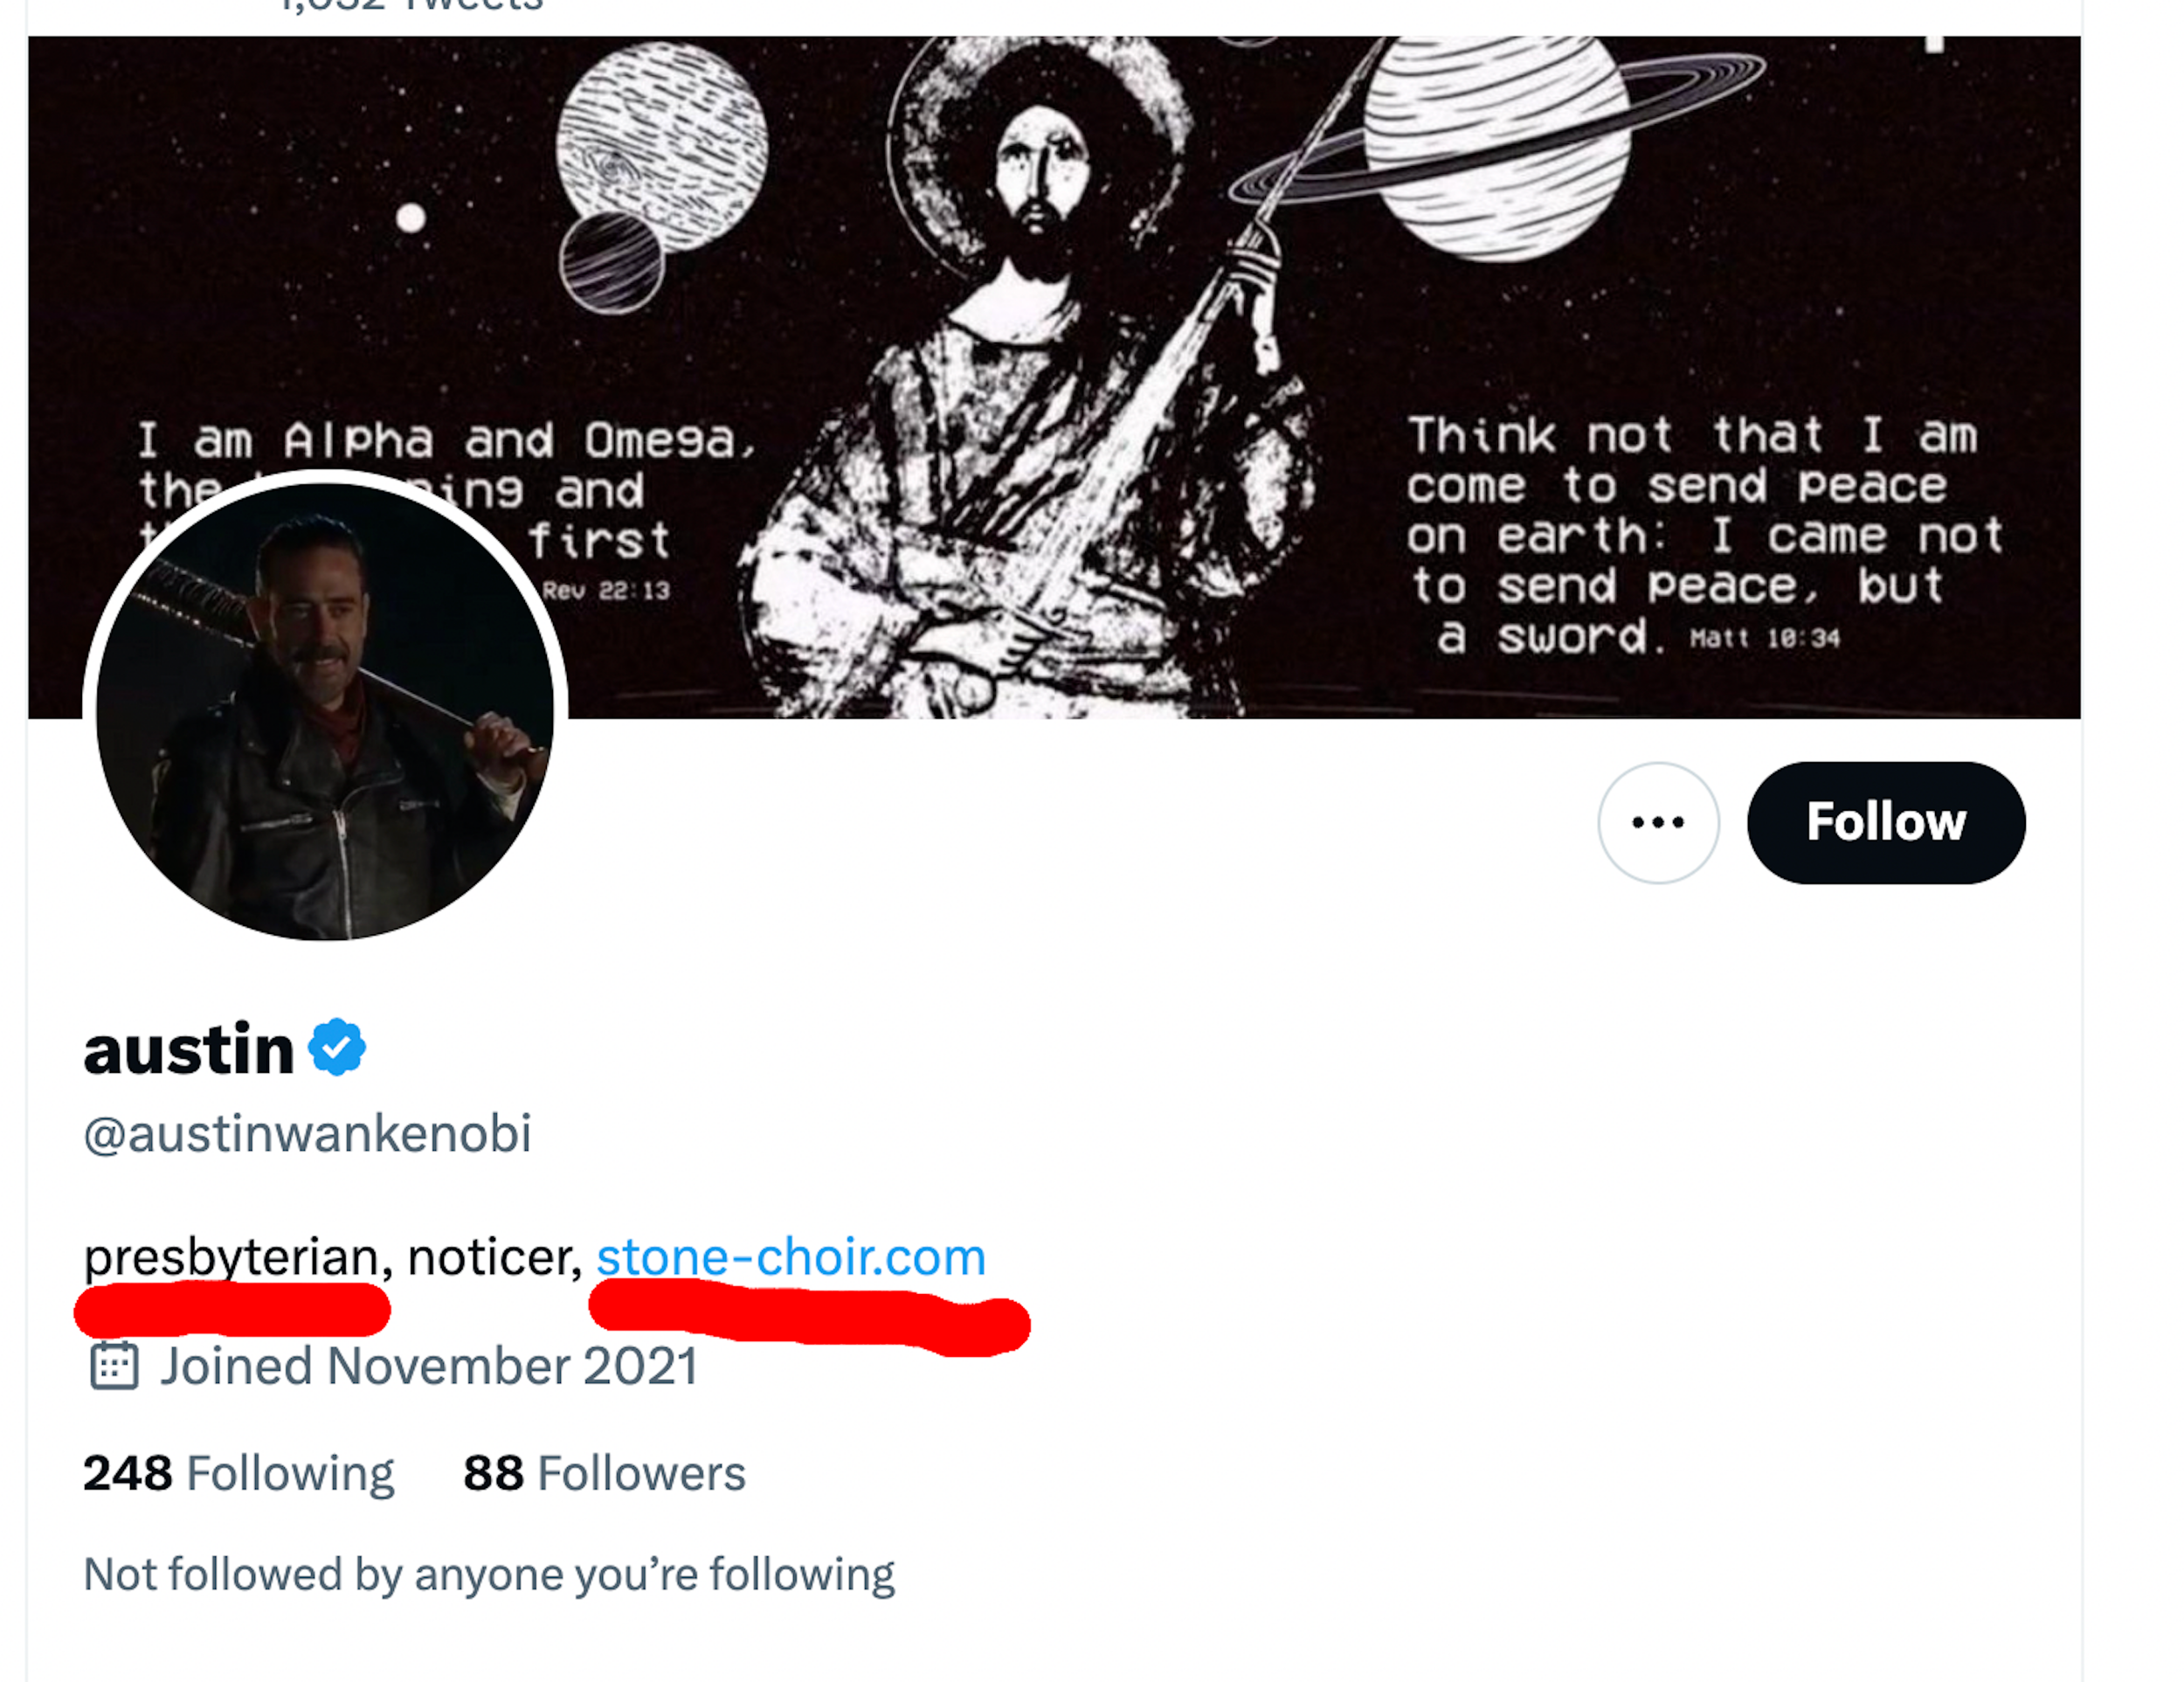 Austin (@austinwankenobi)'s Twitter bio, reading 'presbyterian, noticer, stone-choir.com." (Noticer is an anti-semitic meme.) Banner header features Jesus carrying a gun and Bible verses that call him "Alpha and Omega" as well as saying "I came not to send peace but a sword." Planets in background of Jesus.